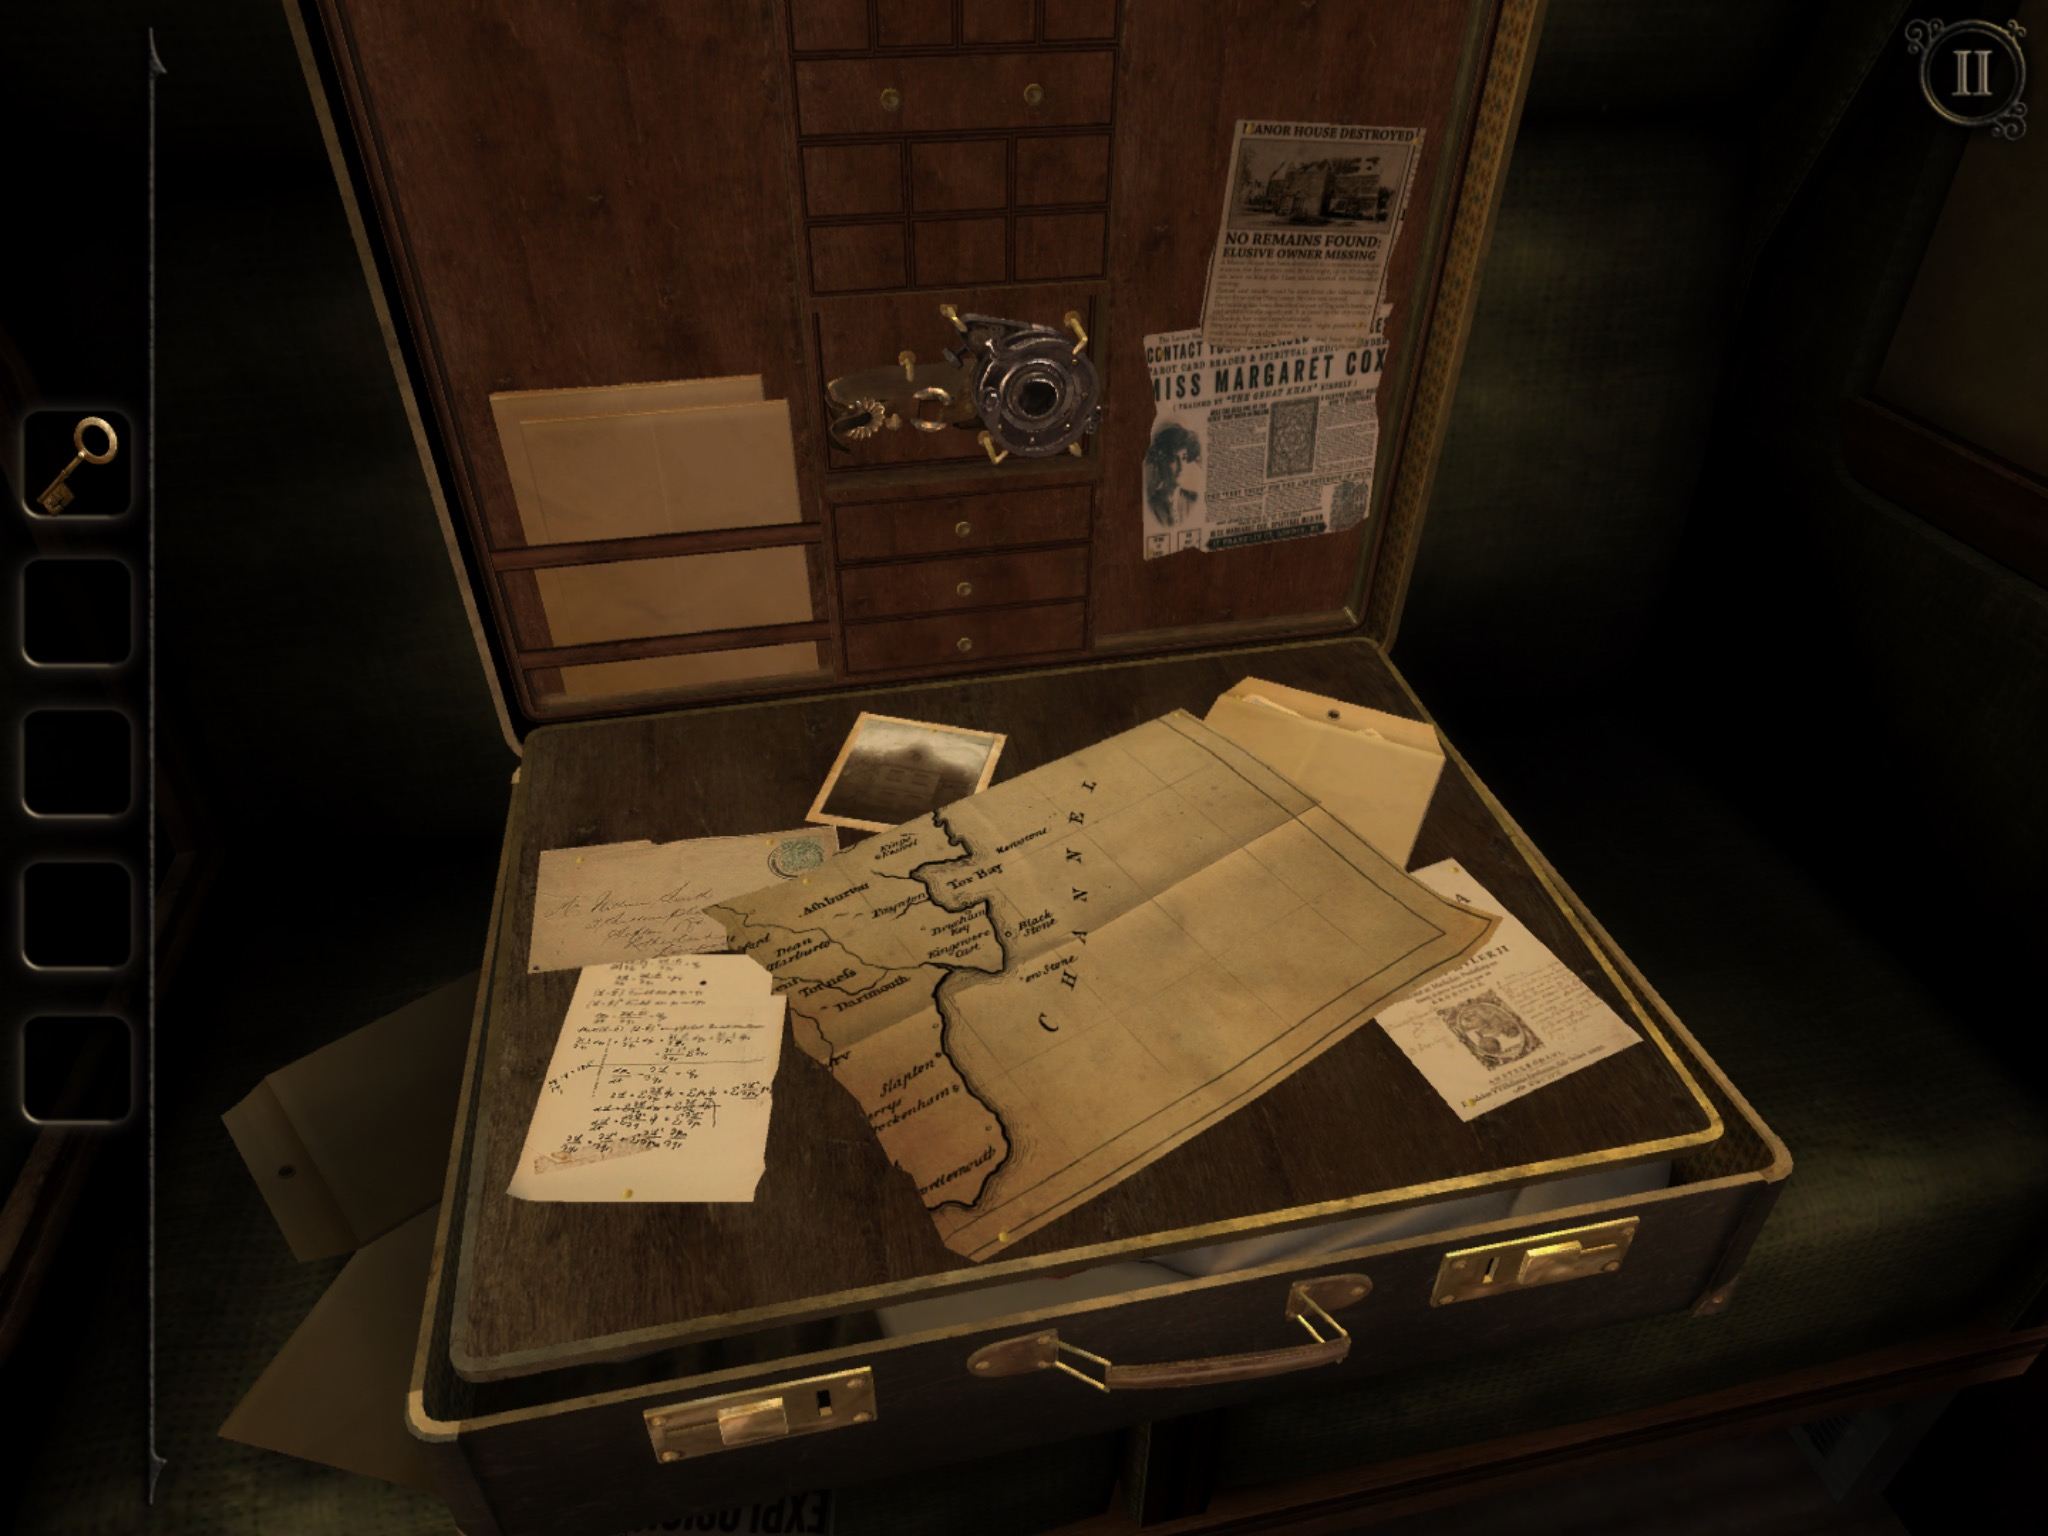 The Room Three Suitcase Compartment